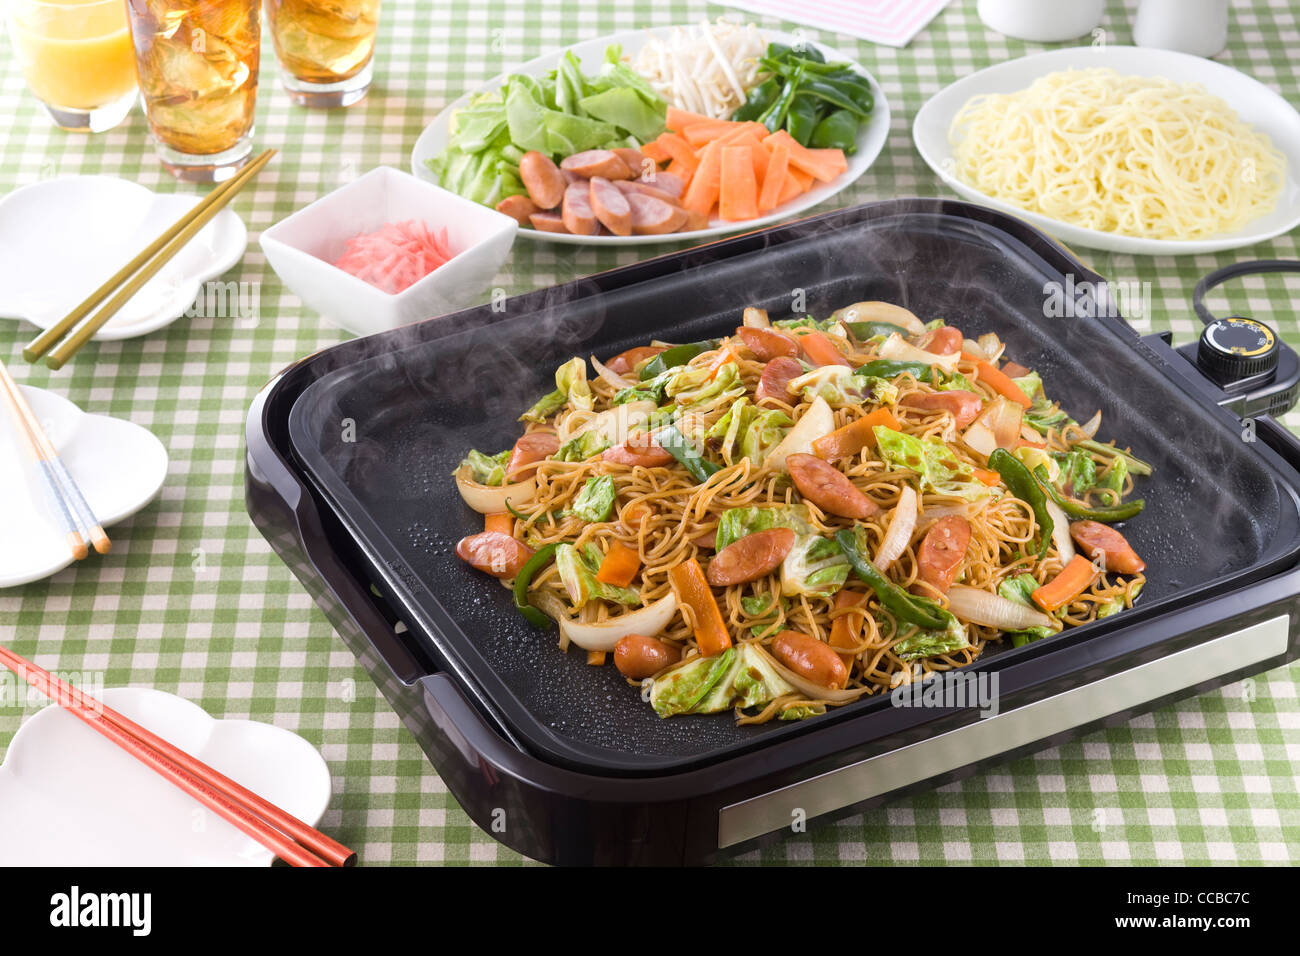 Fried Noodles on Hot Plate Stock Photo